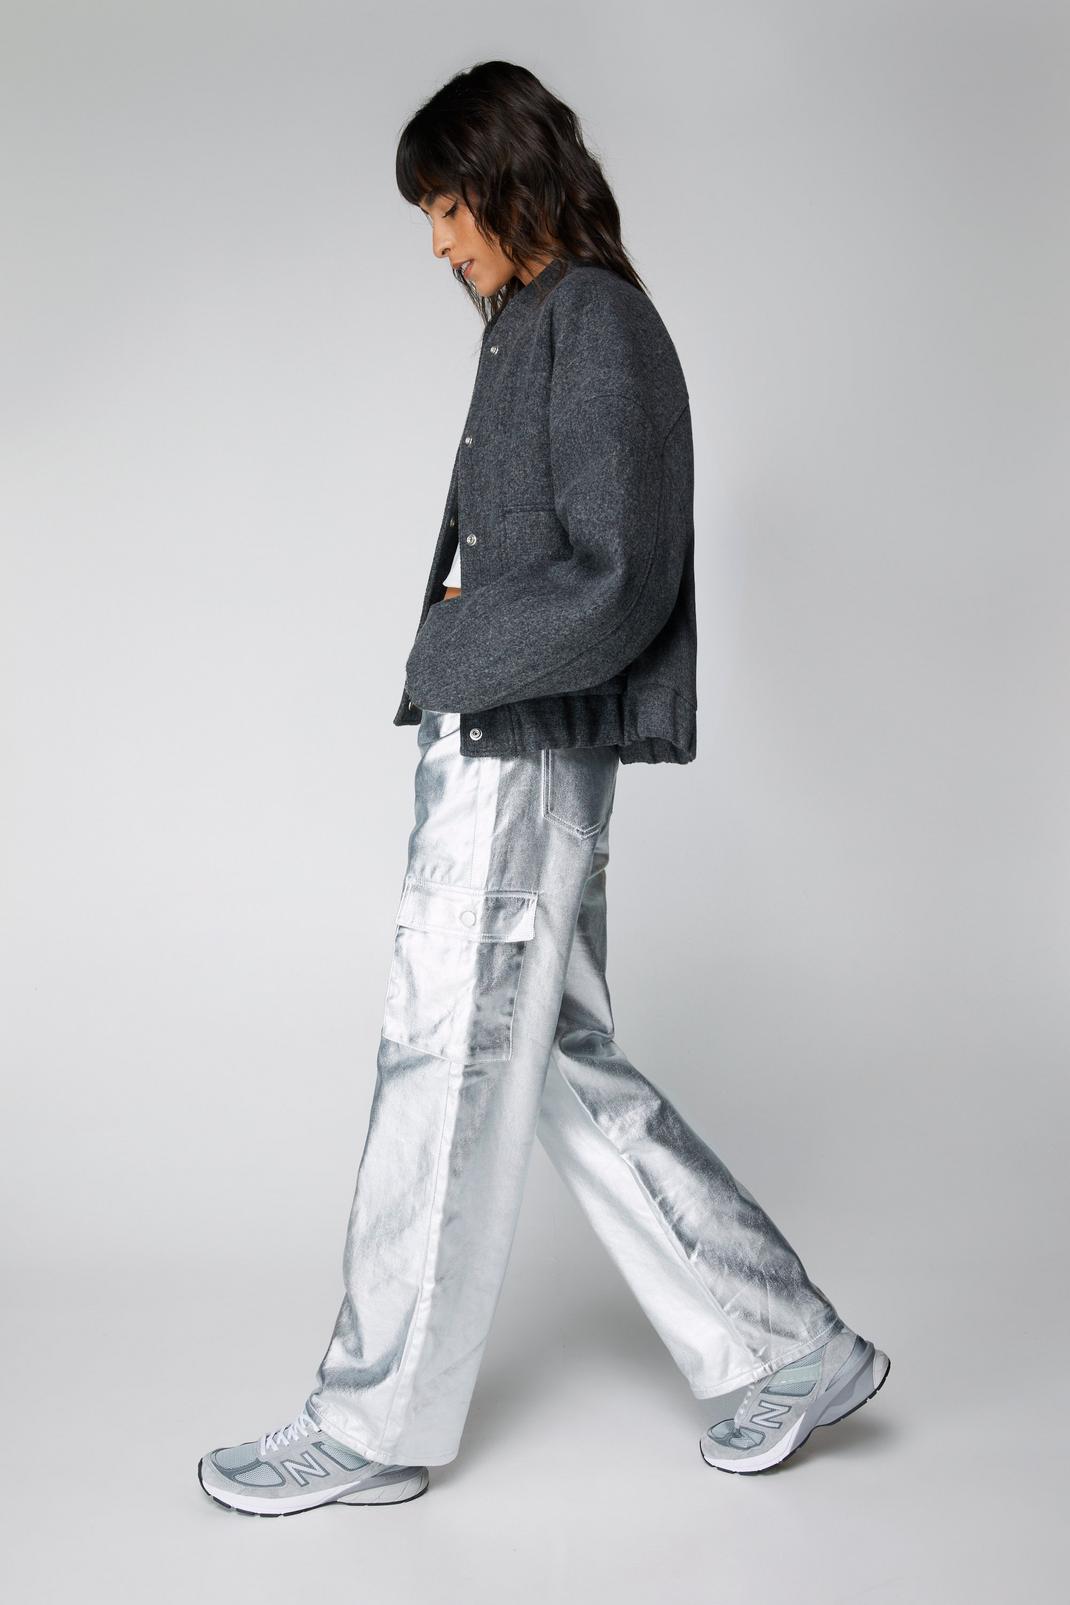 How To Wear The Silver Coated Jean